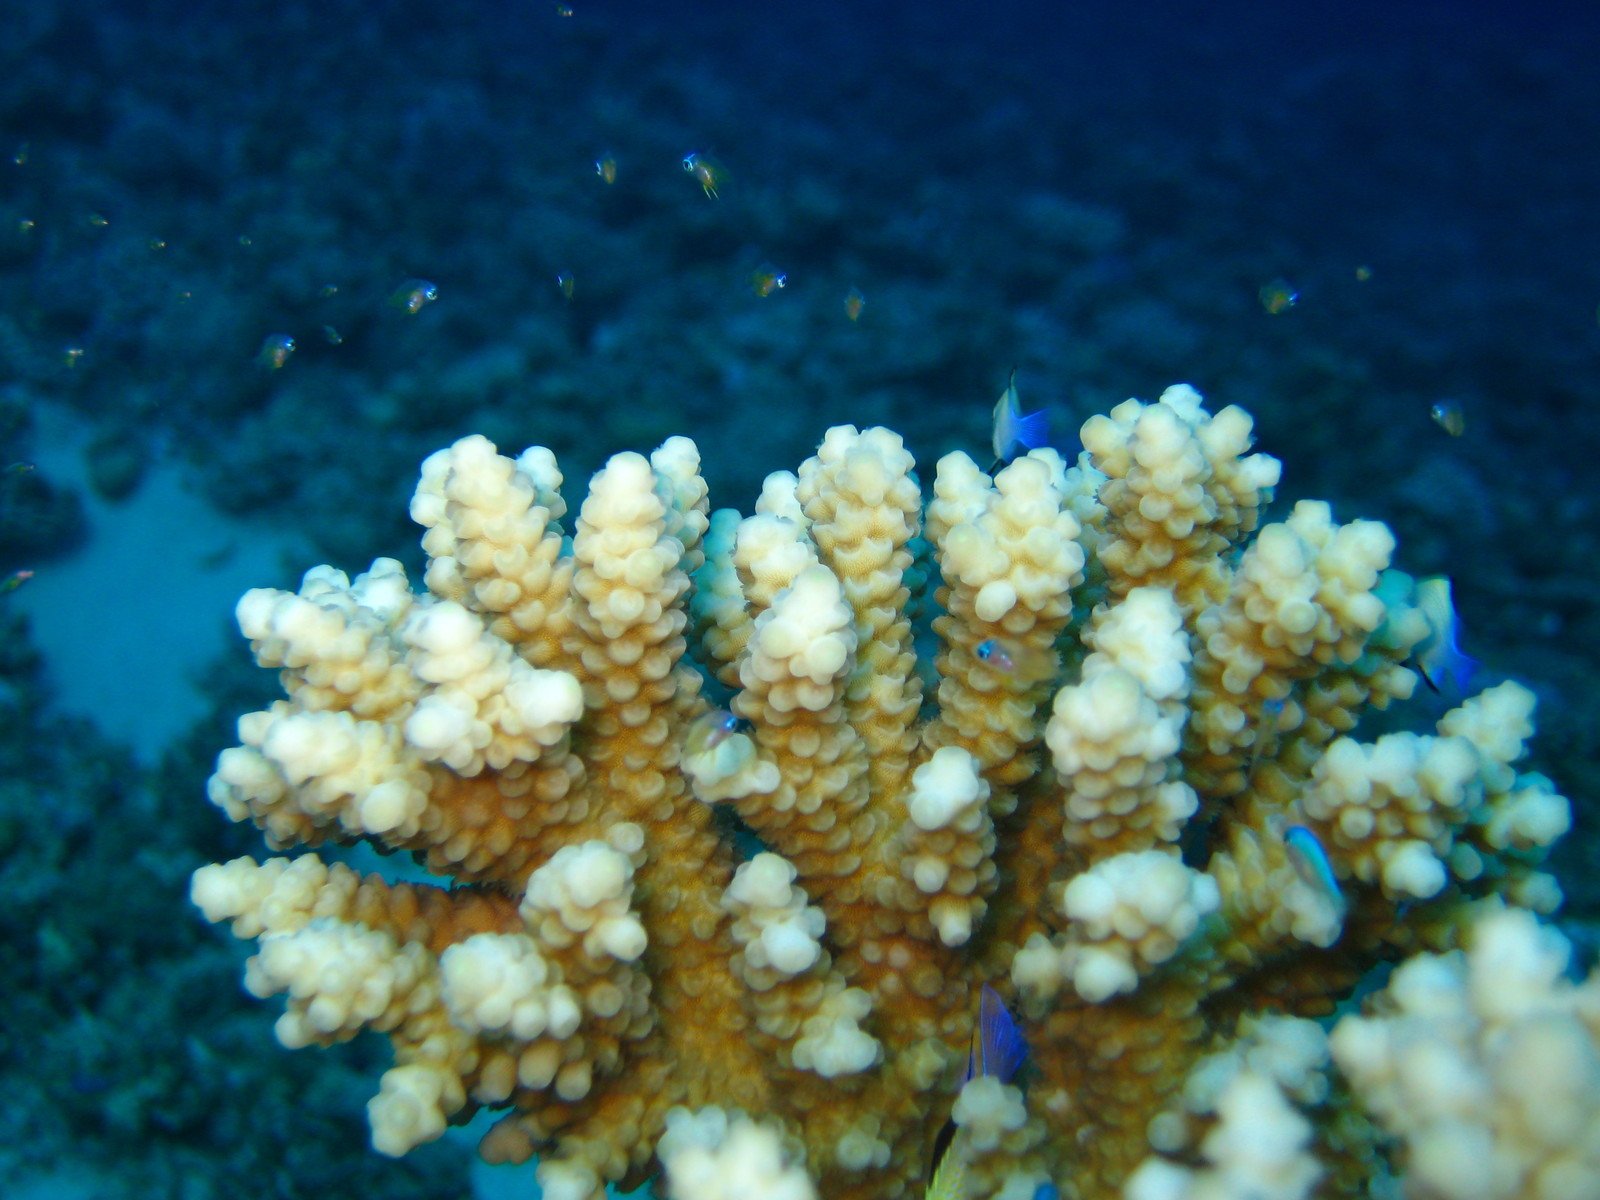 this is an image of some corals and other small things